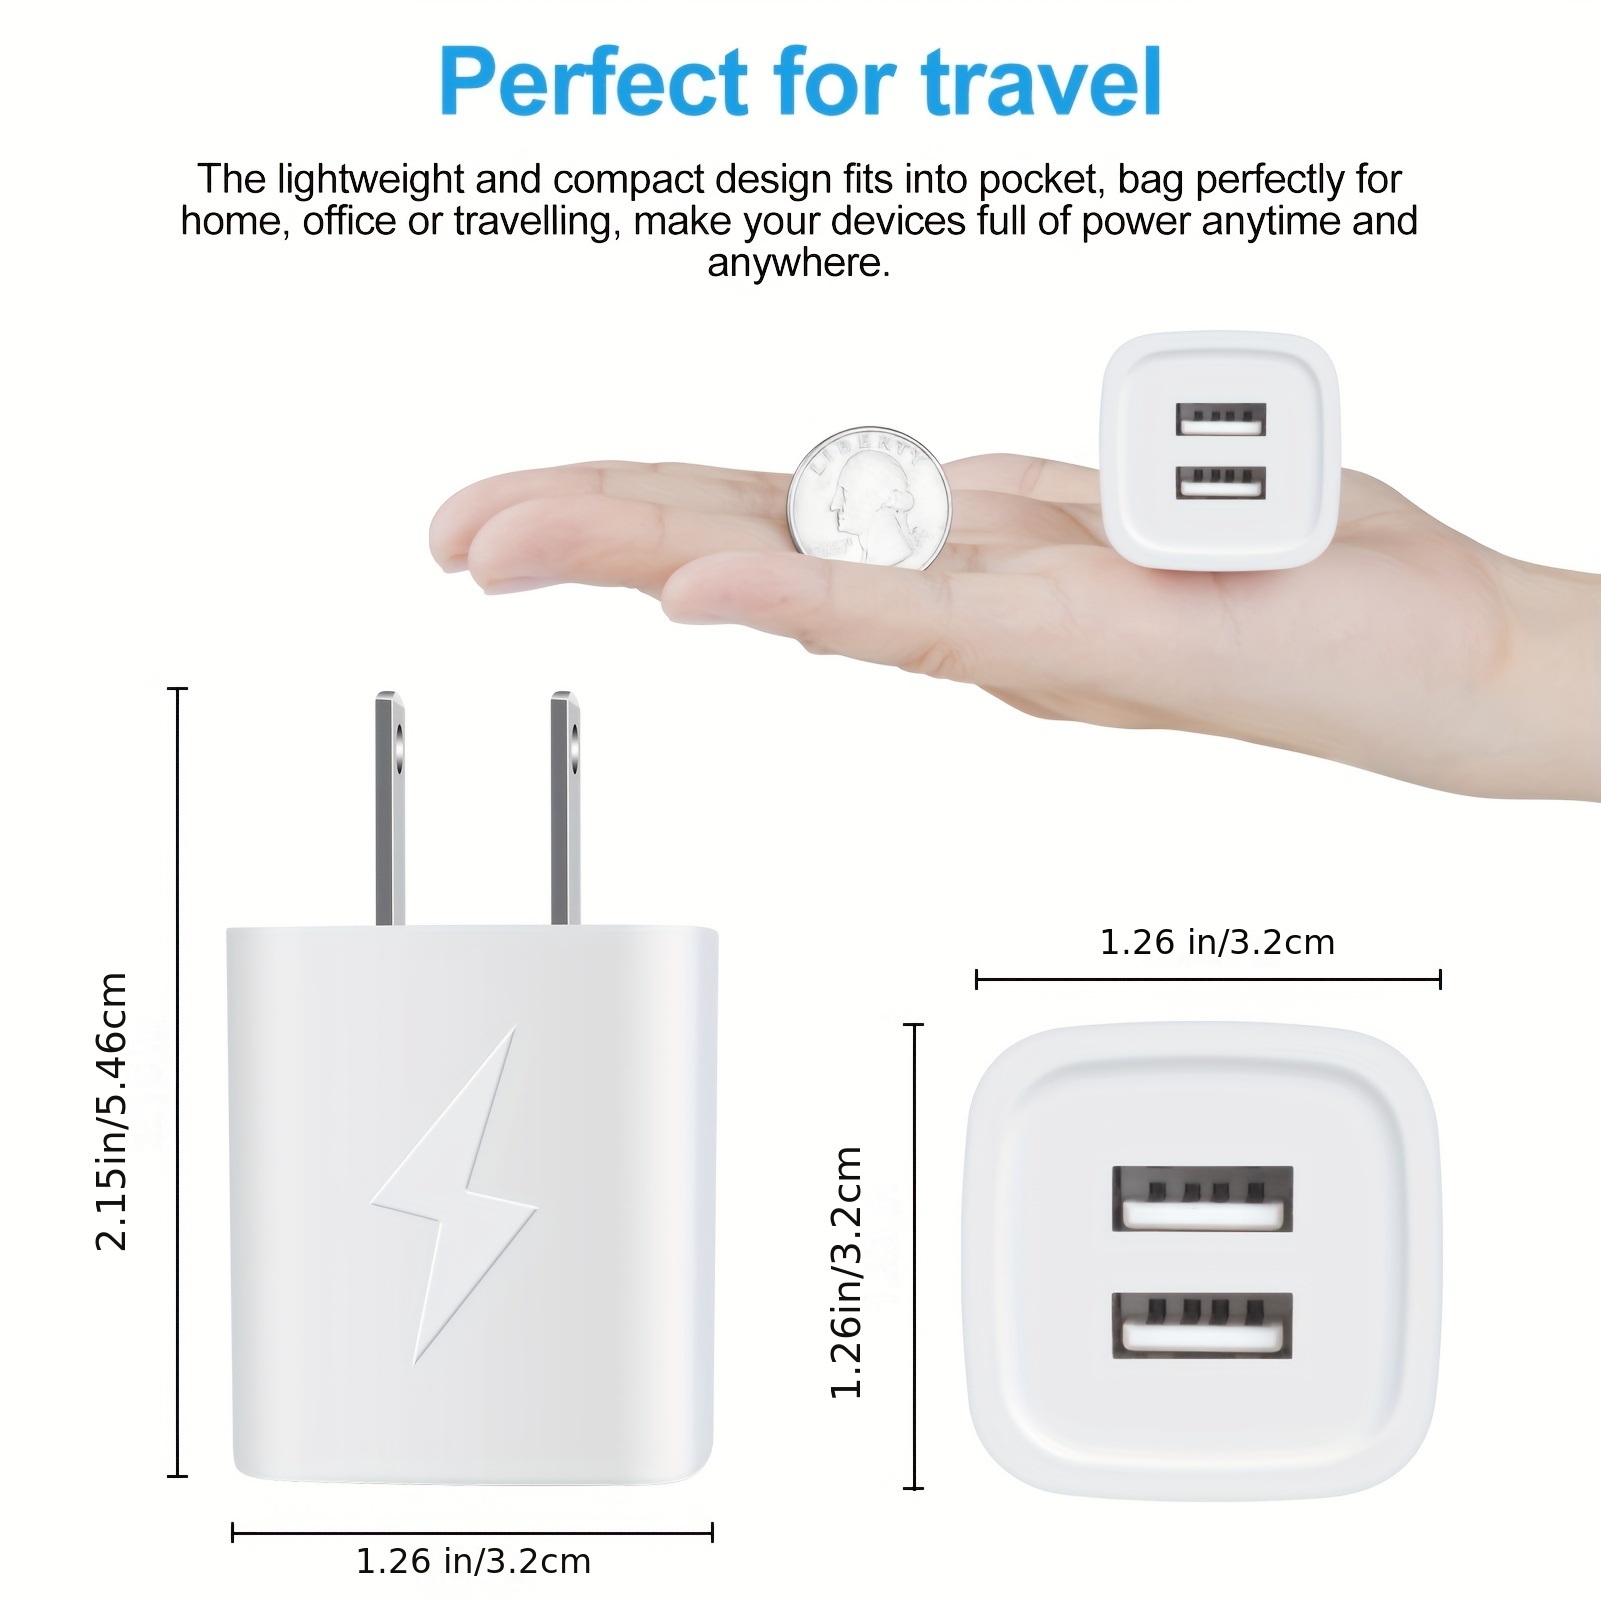 USB Wall Charger Is Compact and Powers Up Your Devices Fast